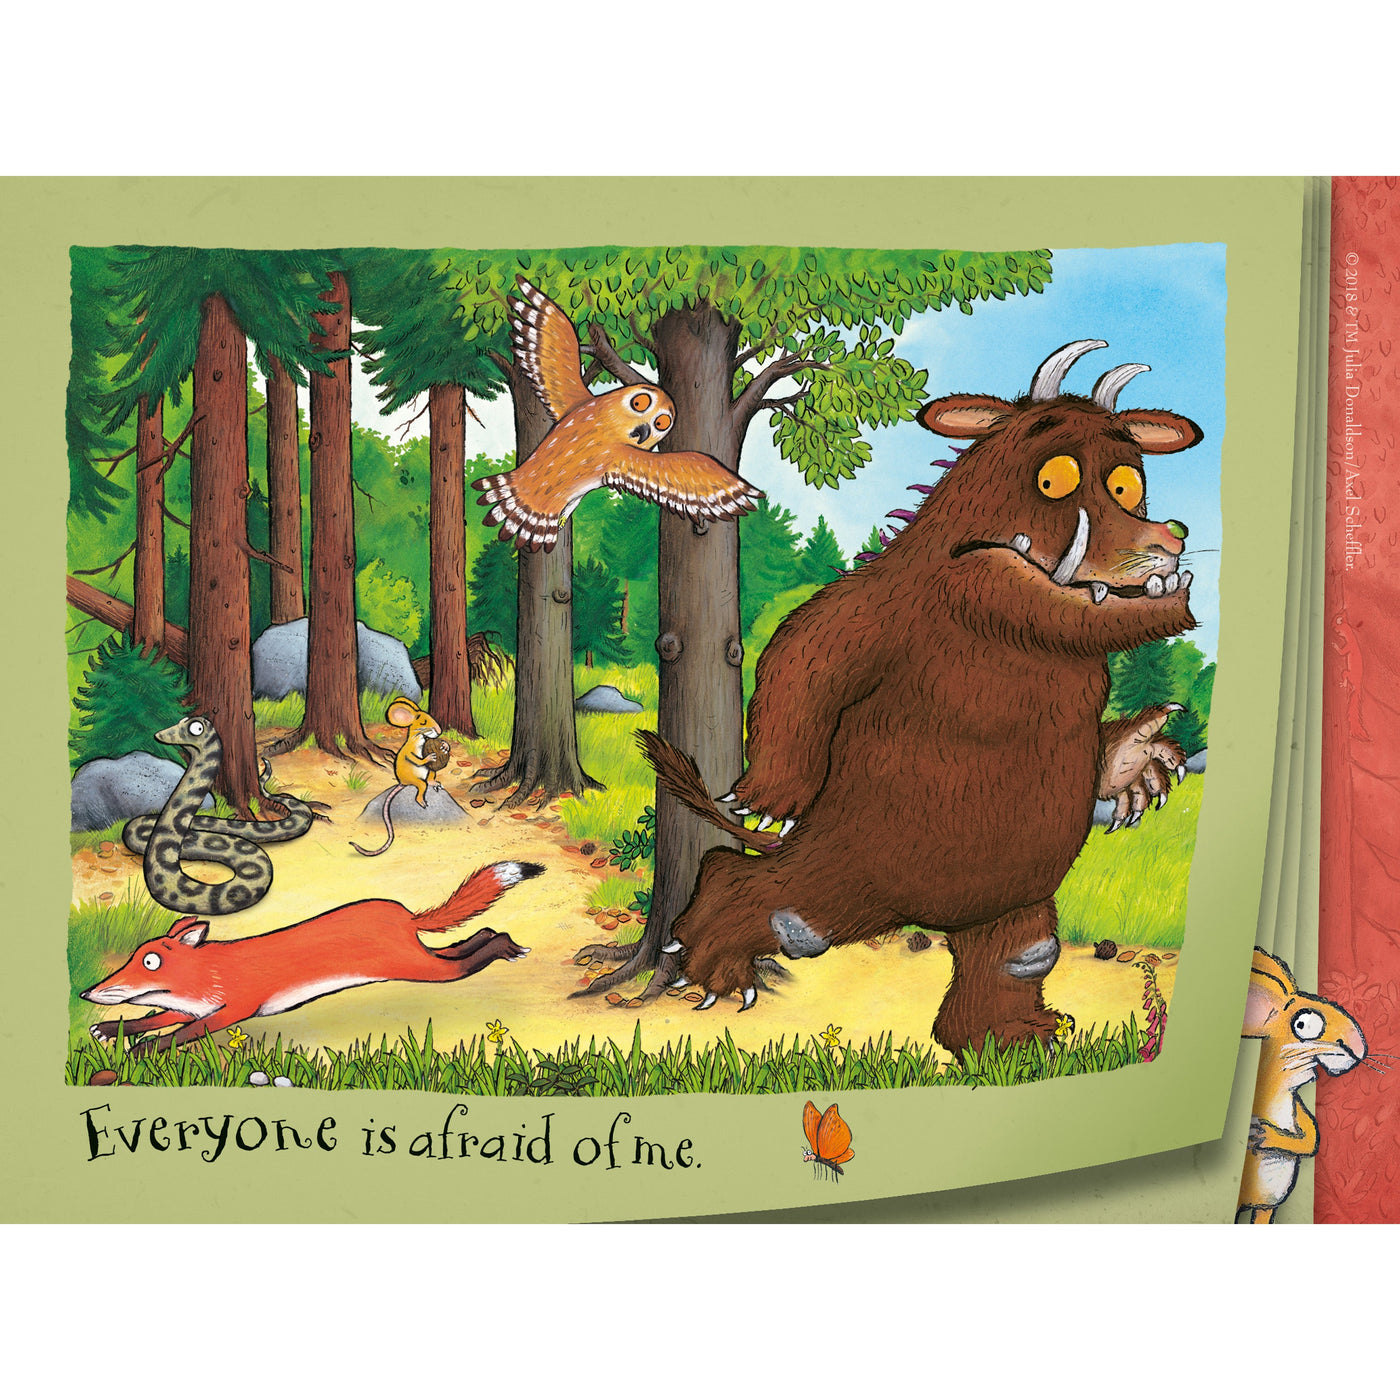 The Gruffalo 4 in a Box Puzzles